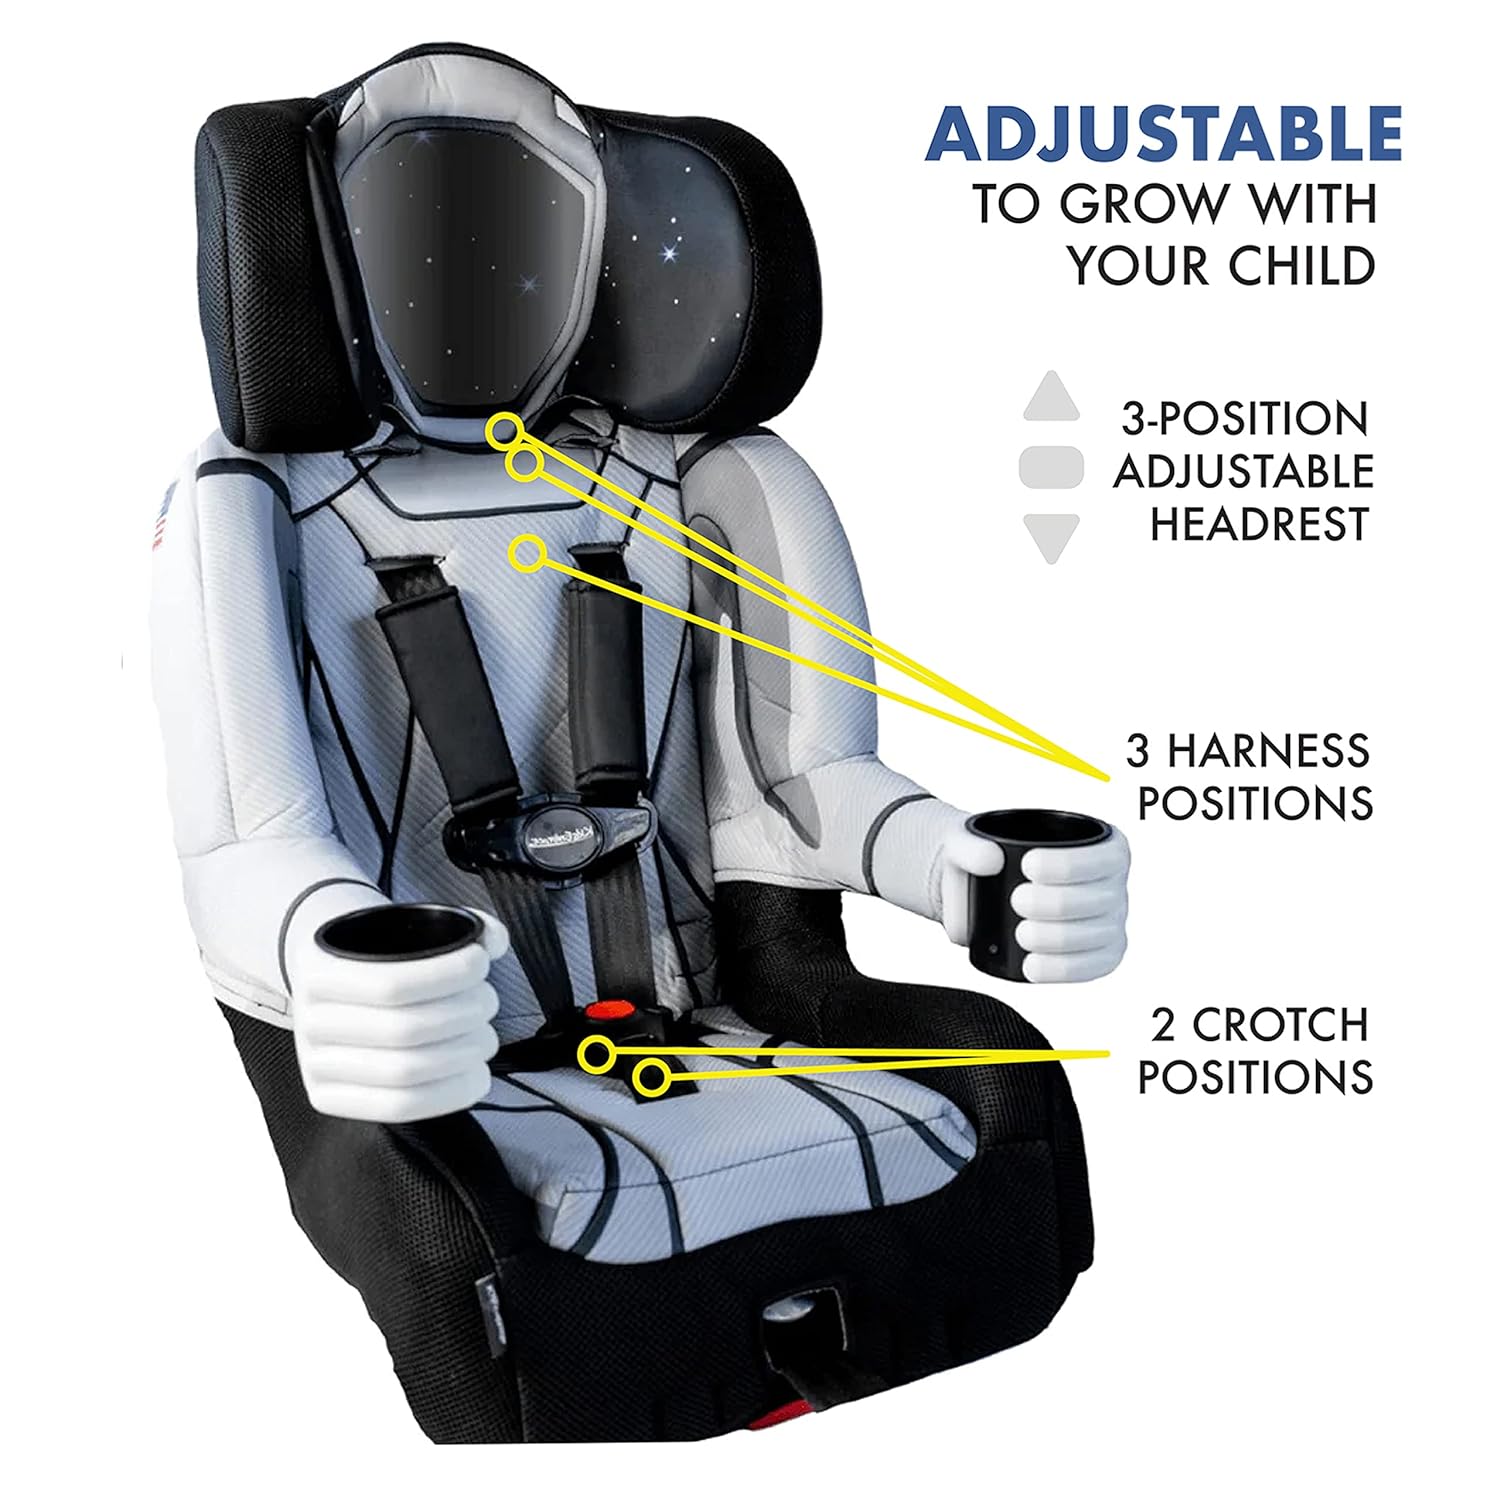 Astronaut 2-in-1 Harness Booster Car Seat